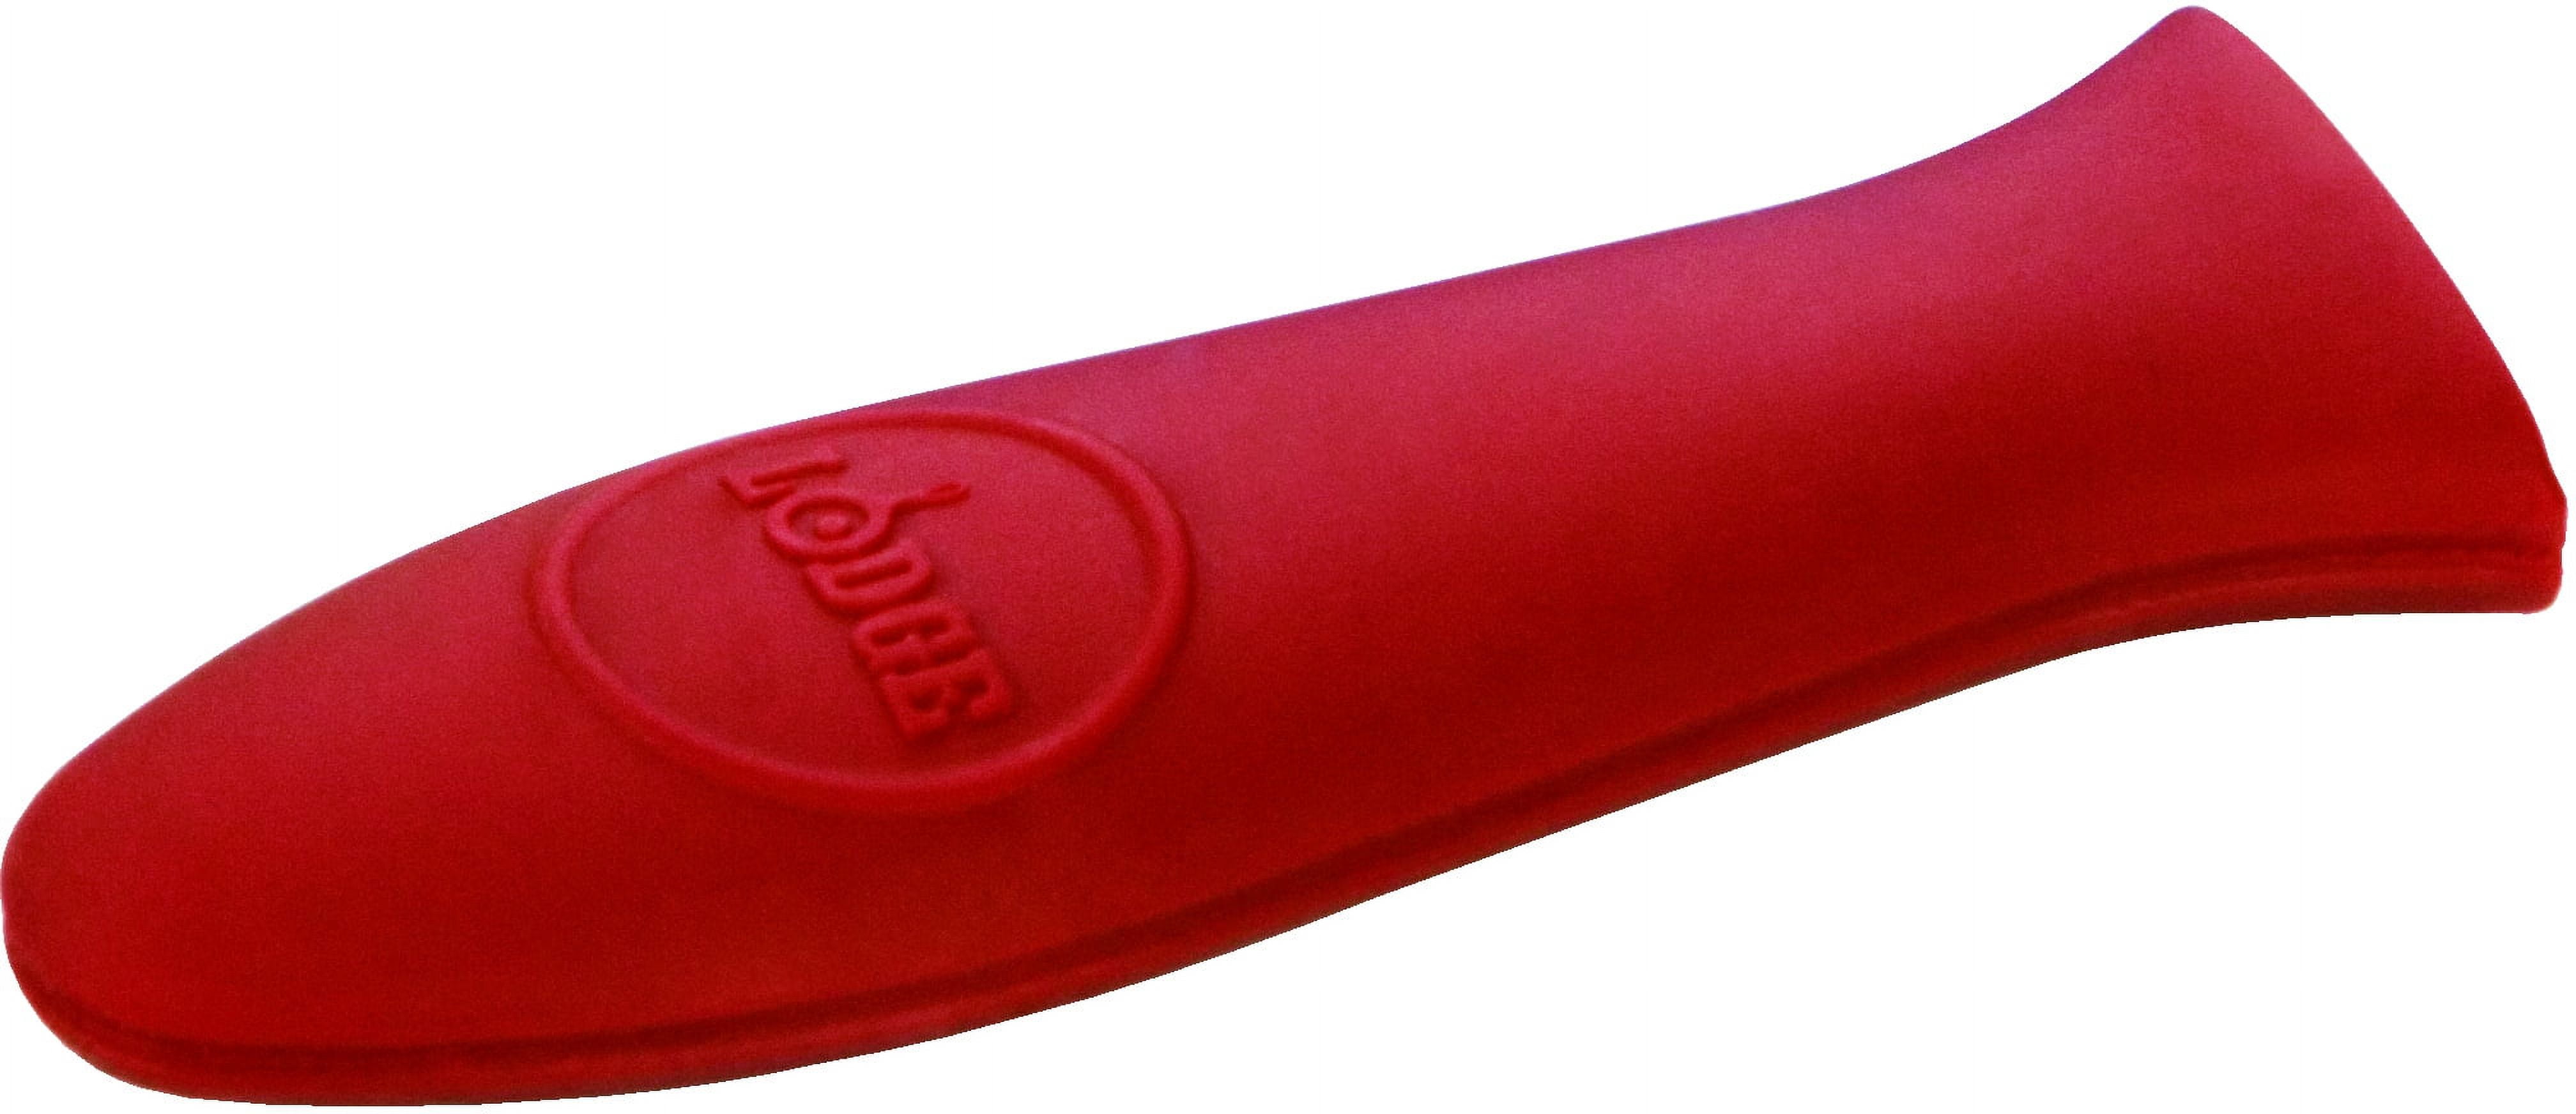 Lodge Cast Iron Red Silicone Hot Handle Holder for Skillets, ASHH41,  includes One Red Handle Holder 